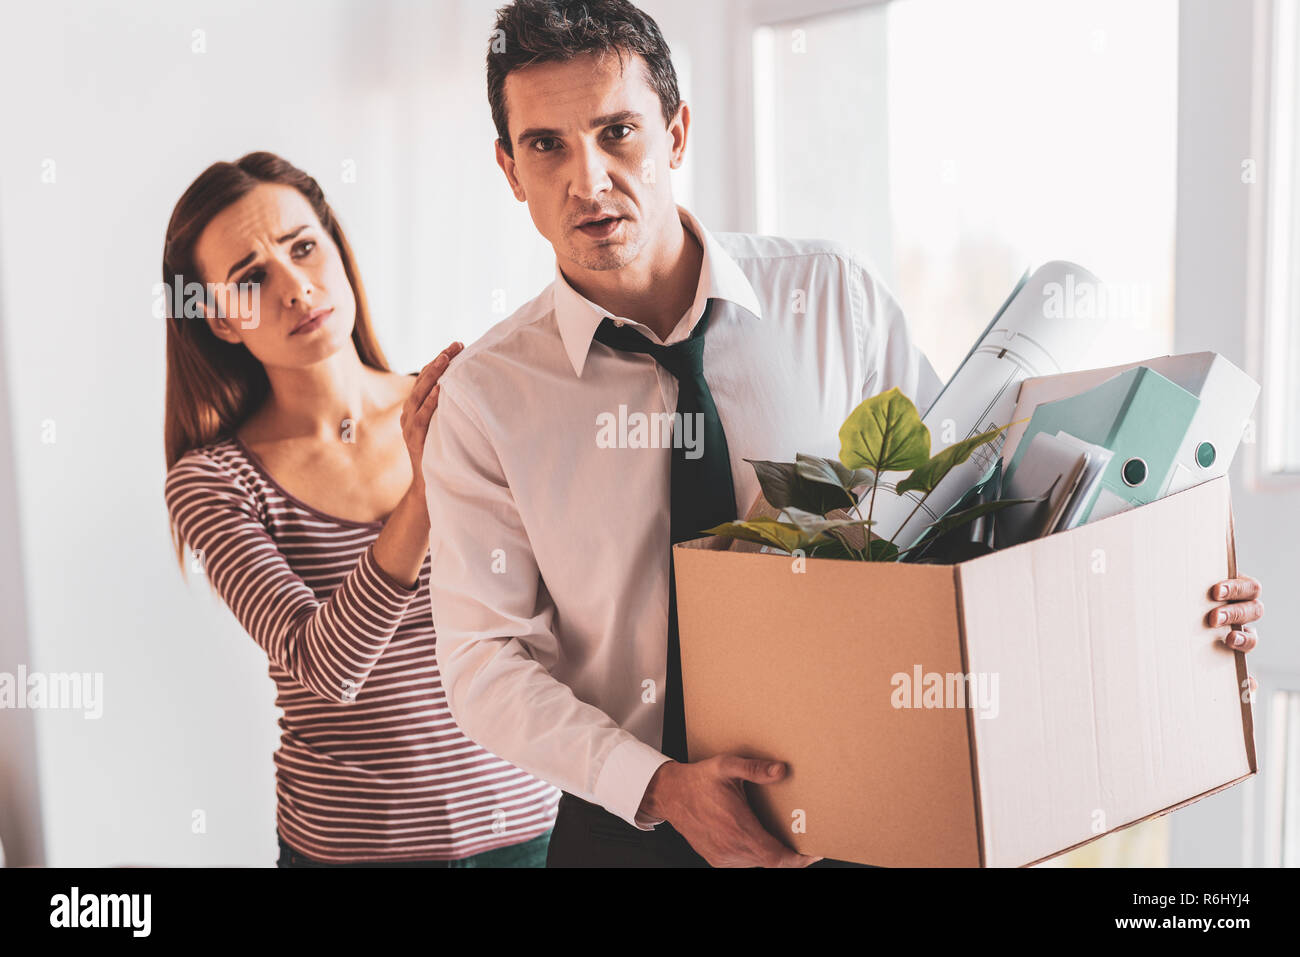 Middle aged man coming home after being dismissed Stock Photo